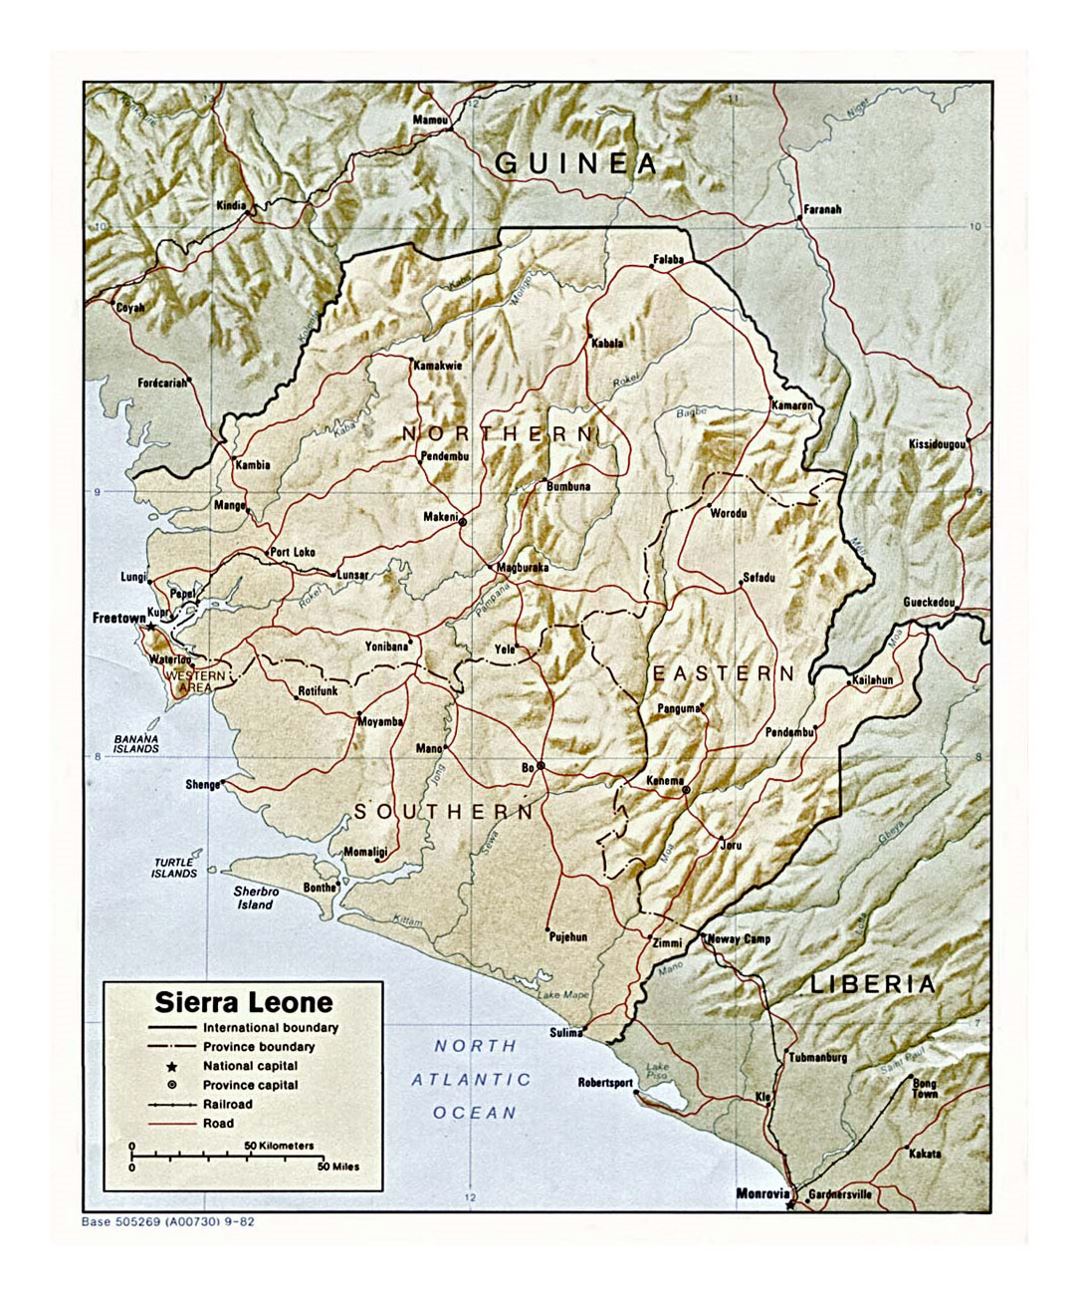 Detailed political and administrative map of Sierra Leone with relief, roads, railroads and major cities - 1982